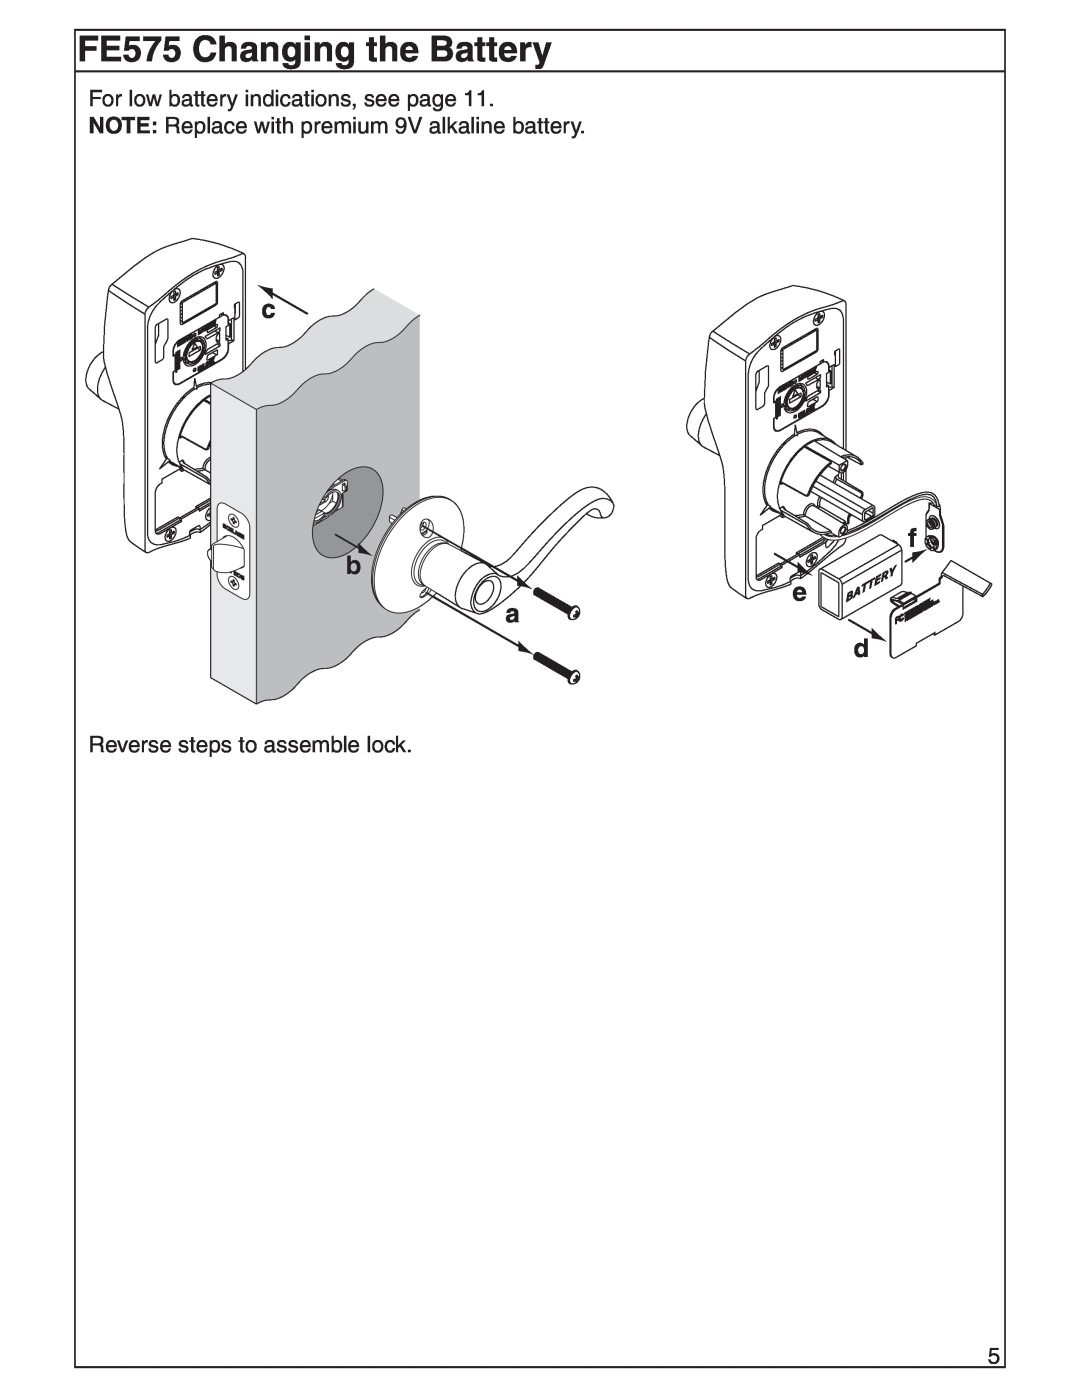 Schlage BE365, FE595 manual FE575 Changing the Battery, c f b e a d 